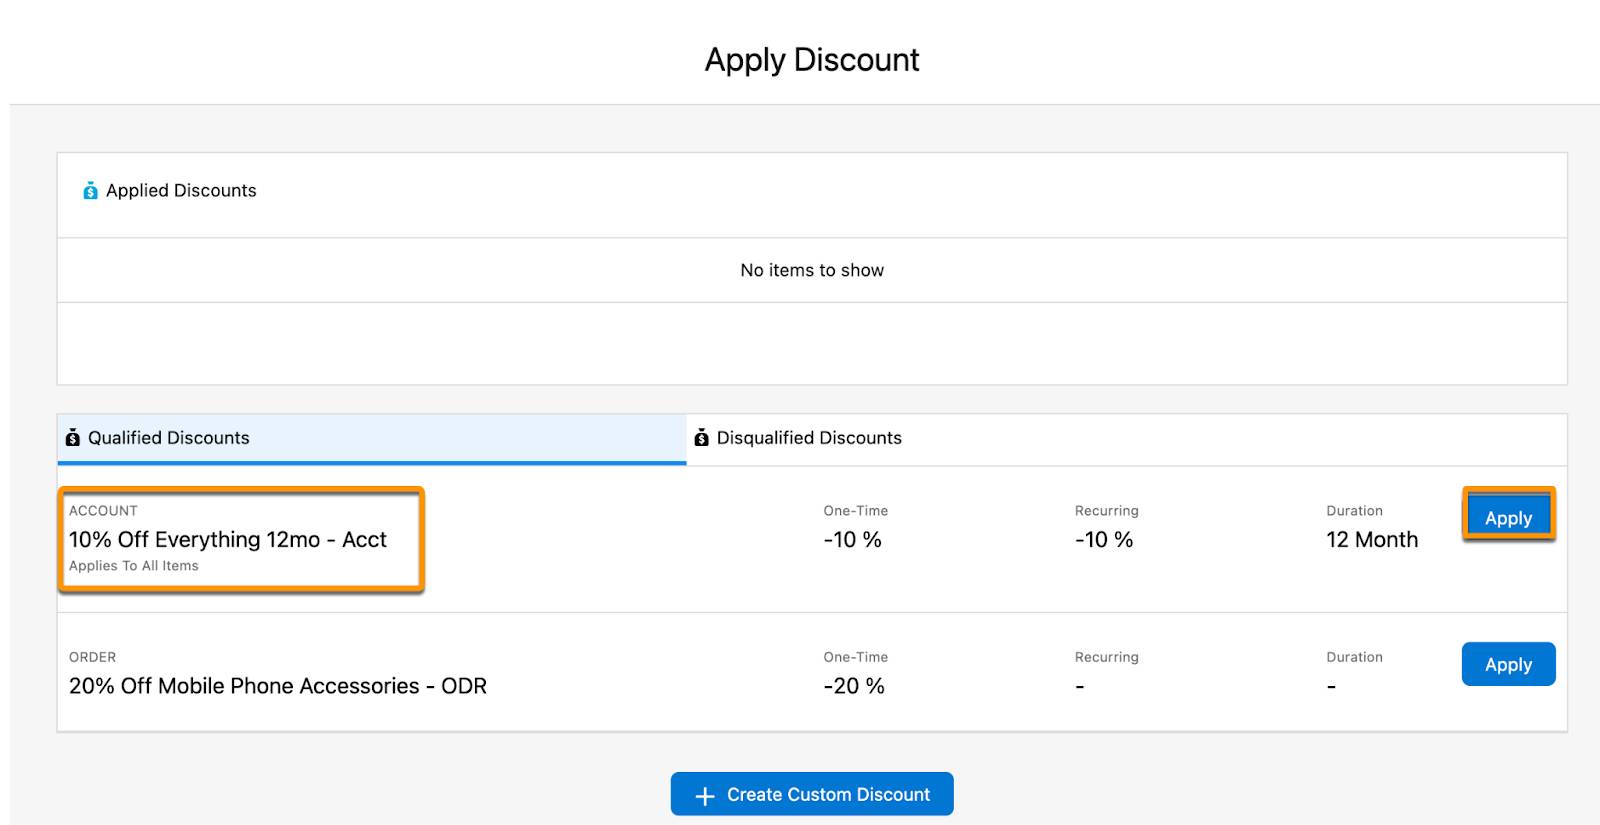 The Apply Discount dialog showing the list of Qualified Discounts.